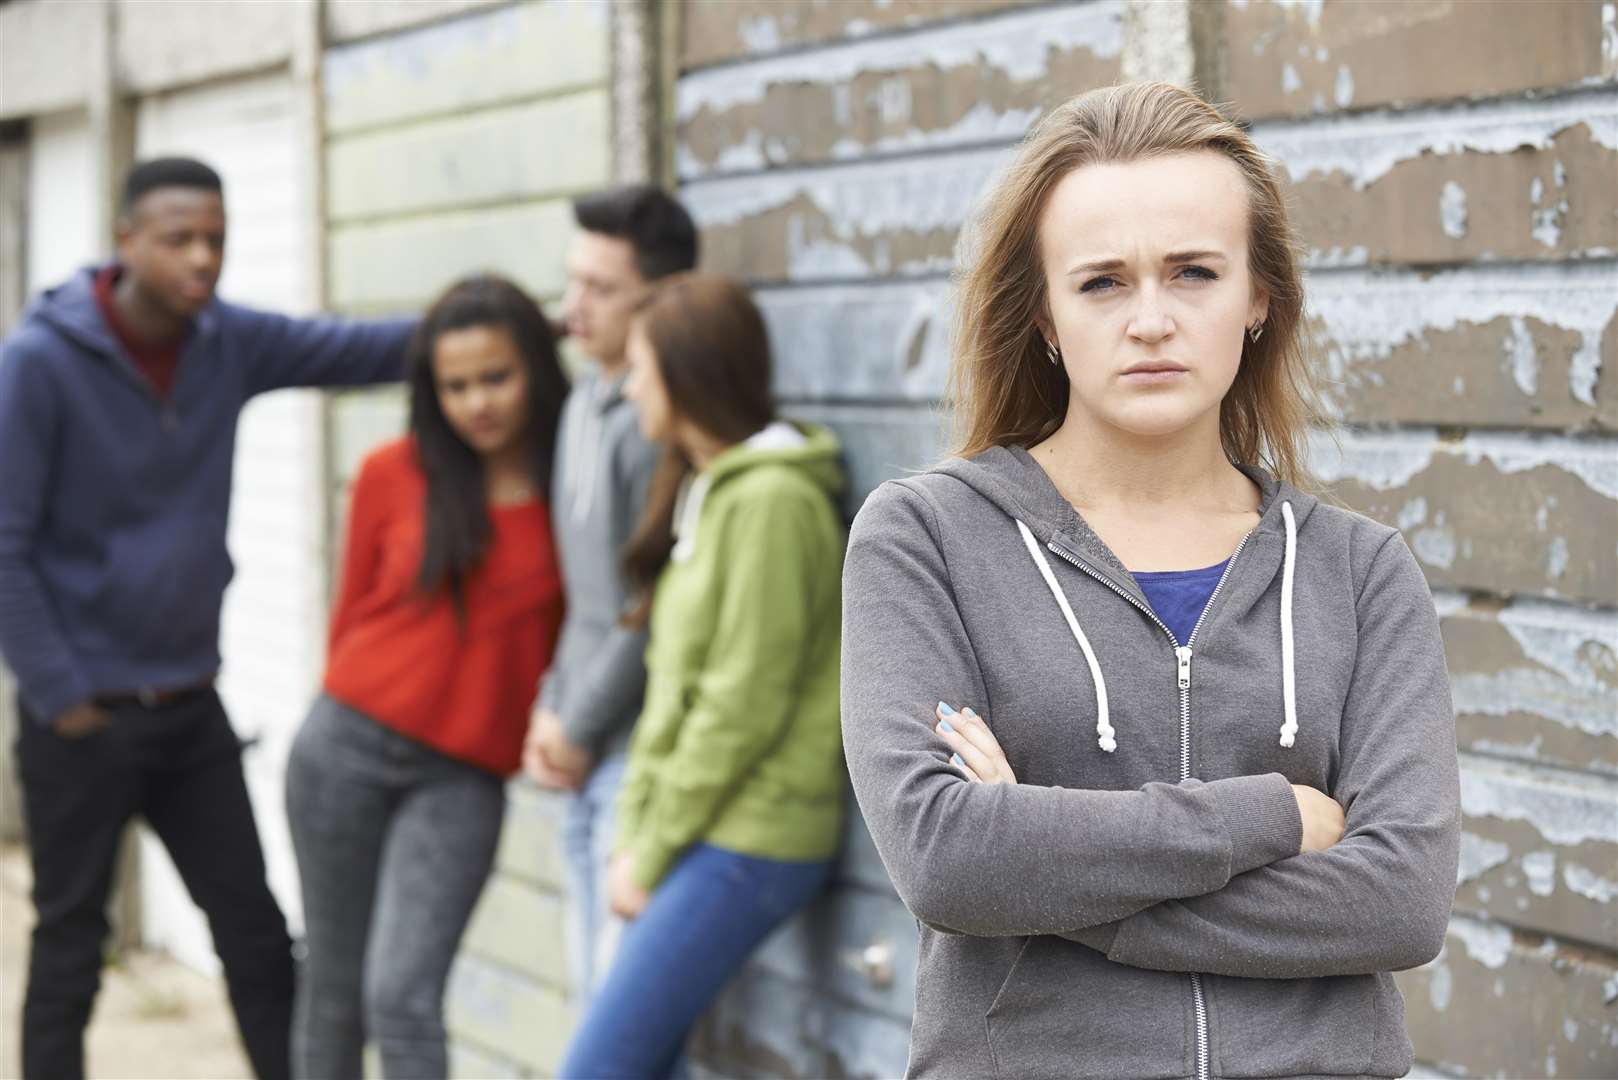 Teenagers who feel 'left out' by friends or of social events will feel lonely